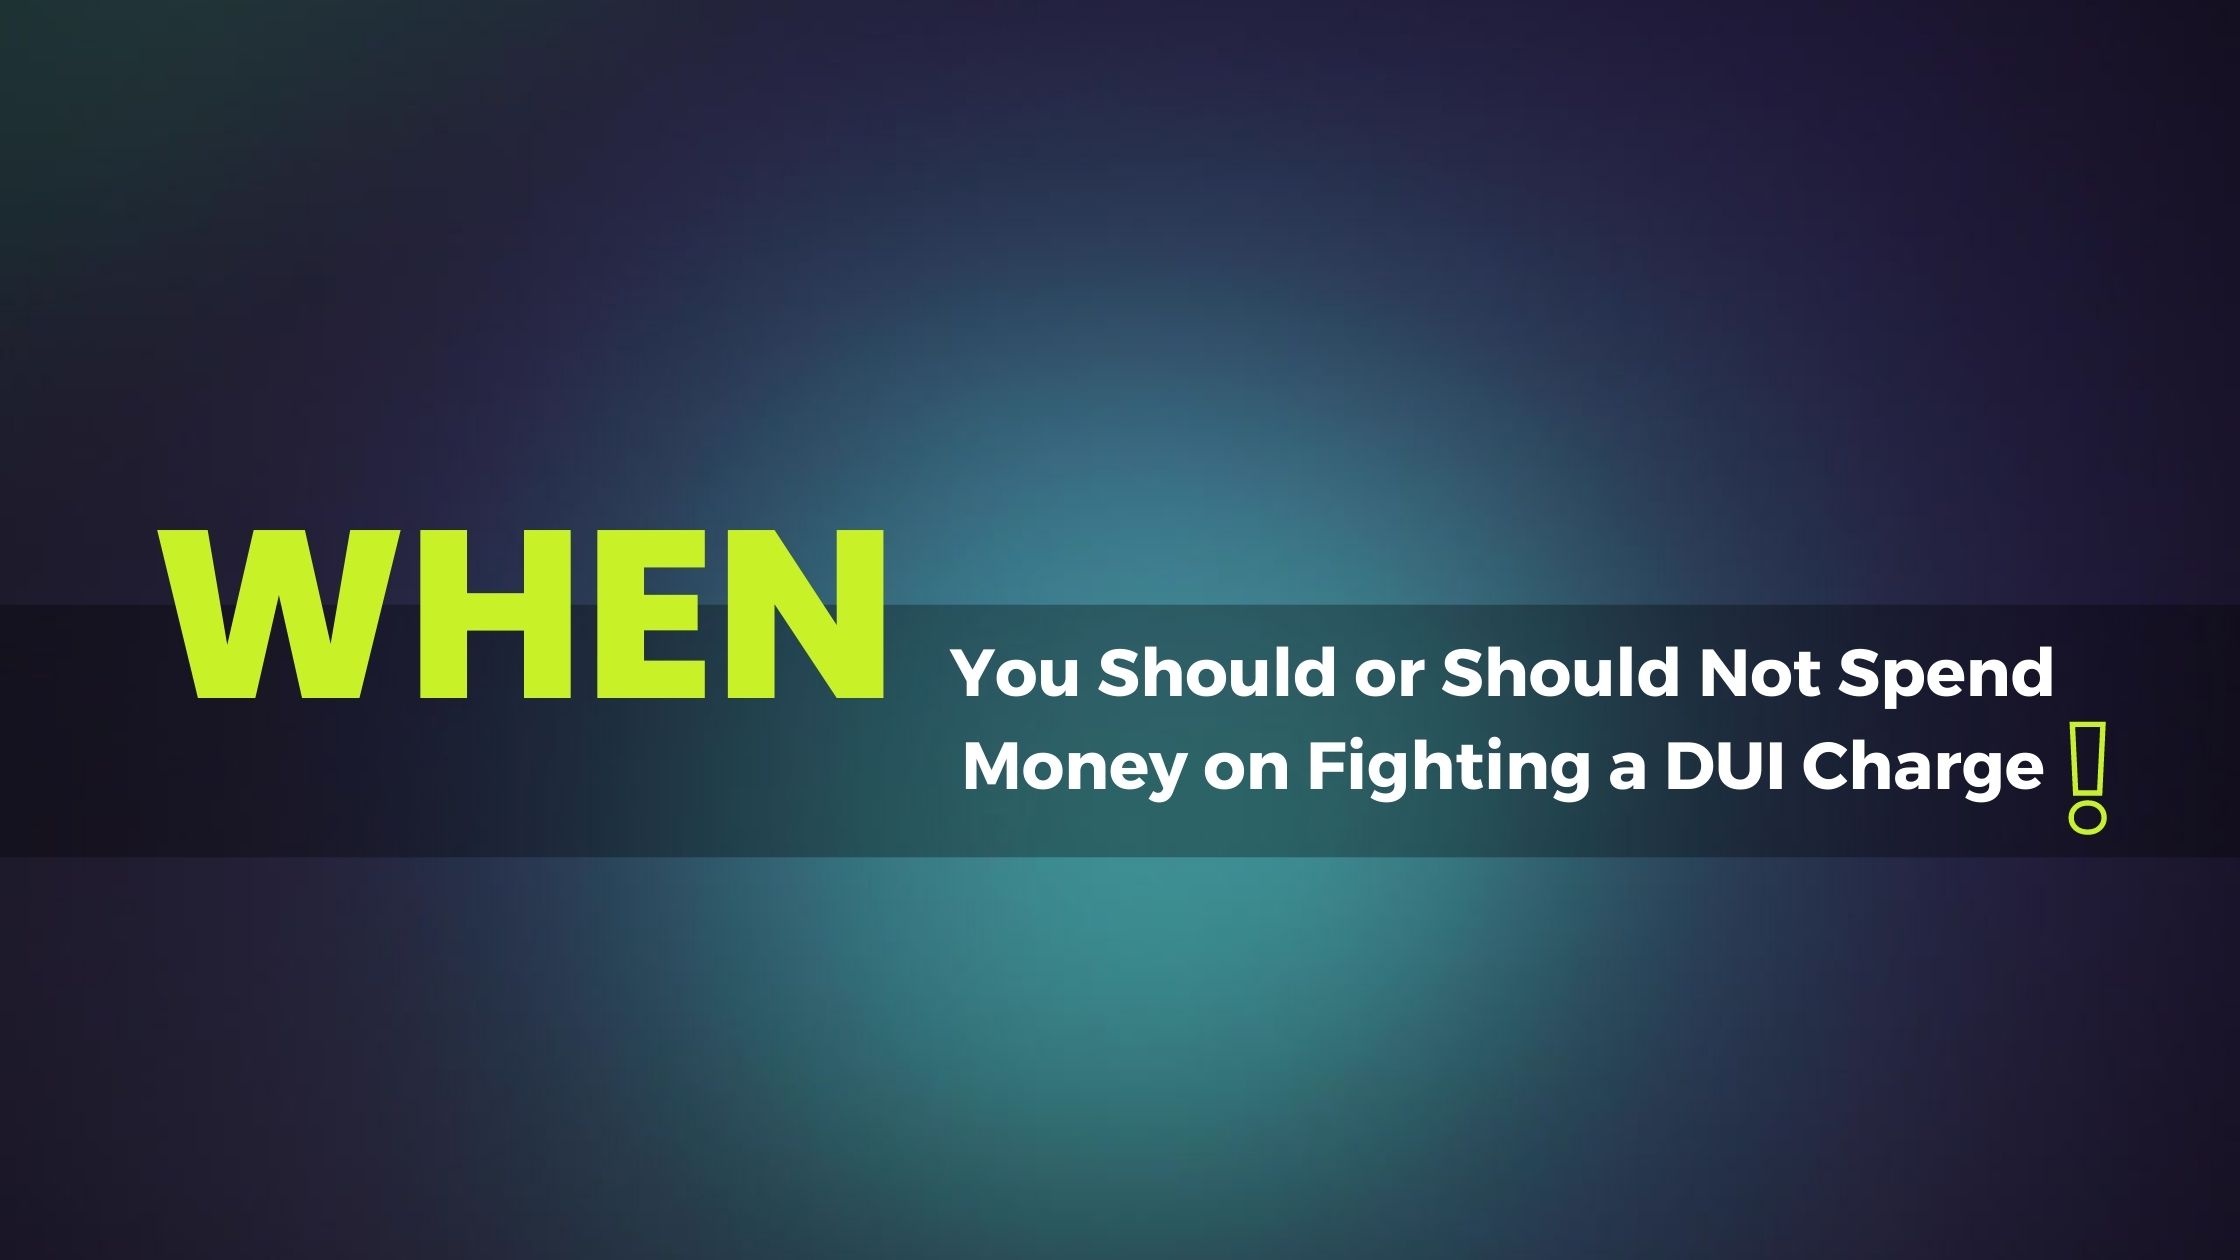 when you should or should not spend money on fighting a dui charge